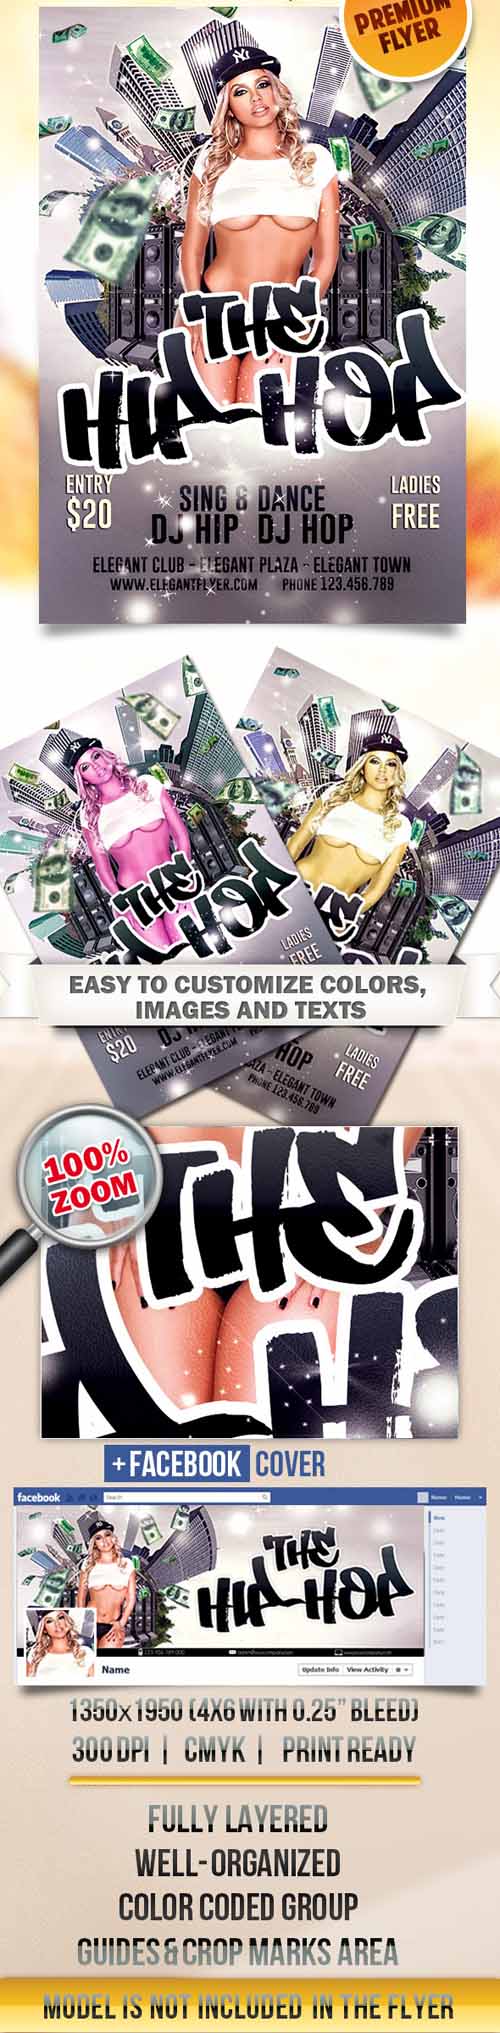 Flyer PSD Template - The Hip-Hop Party + Facebook Cover 4